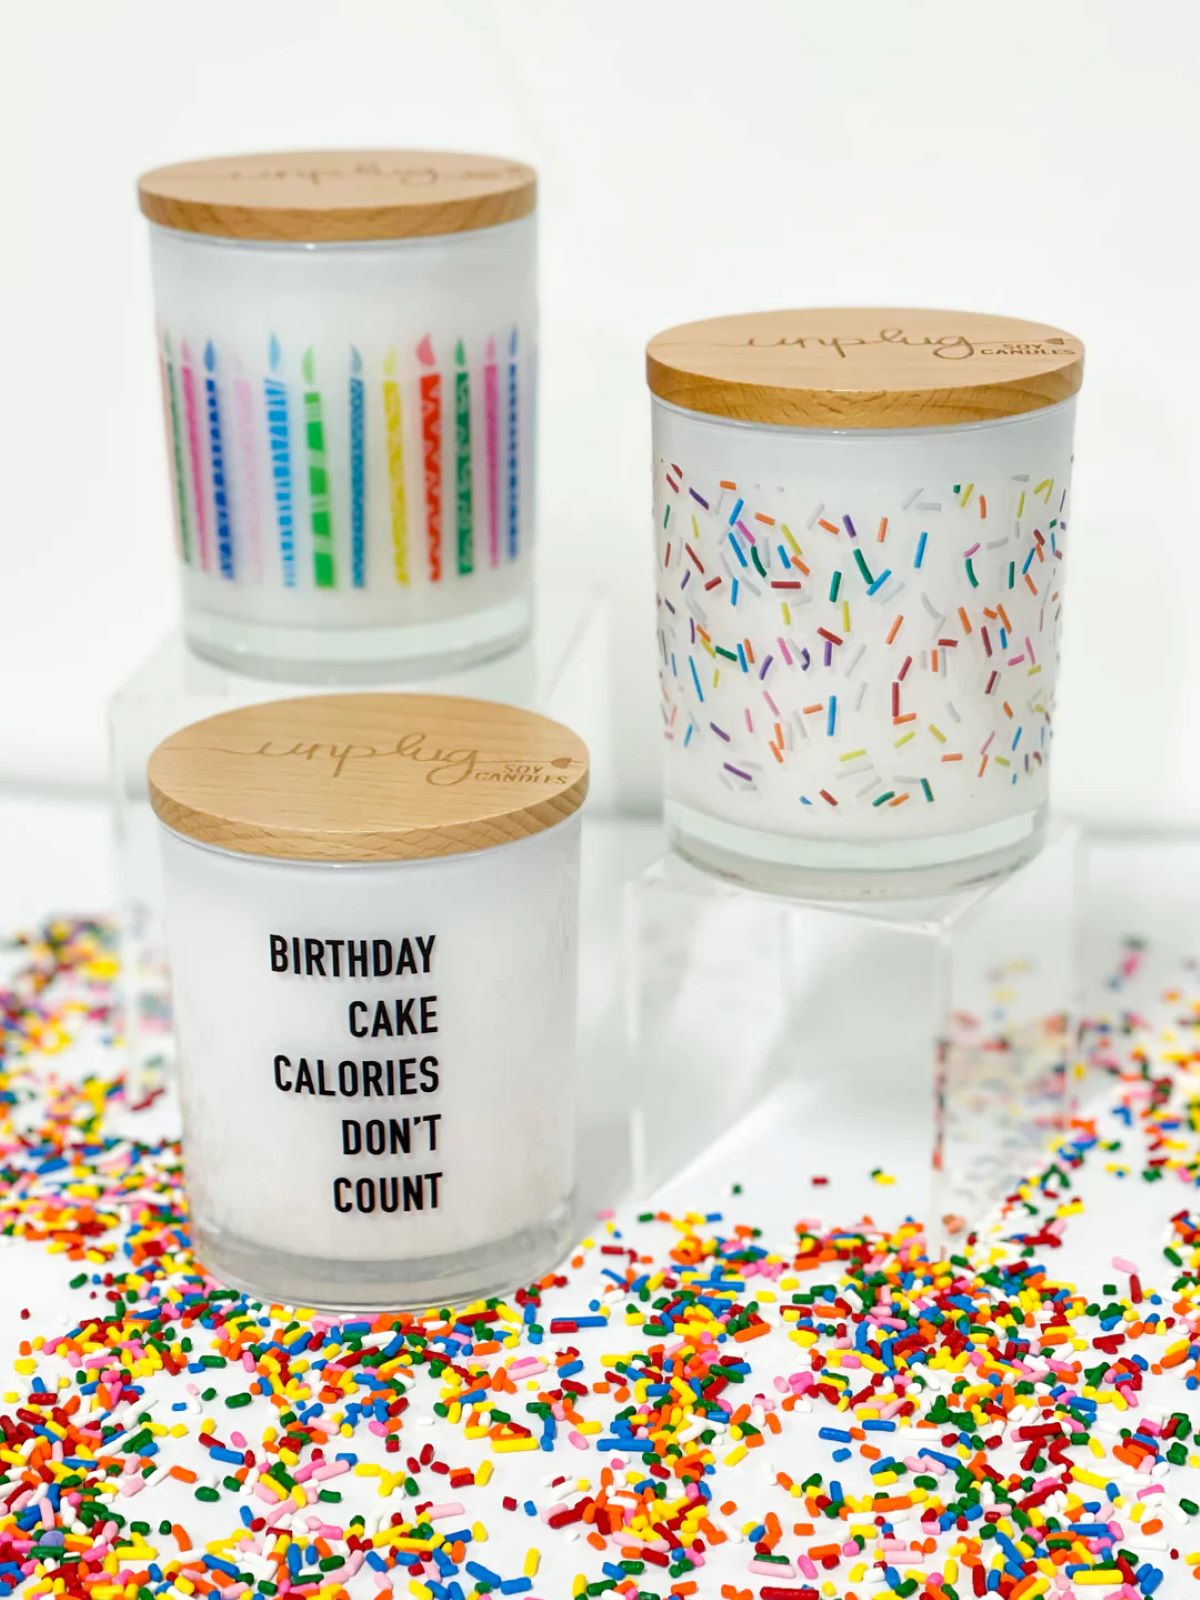 Unplug Soy Candles - Birthday Calories Don’t Count Candles